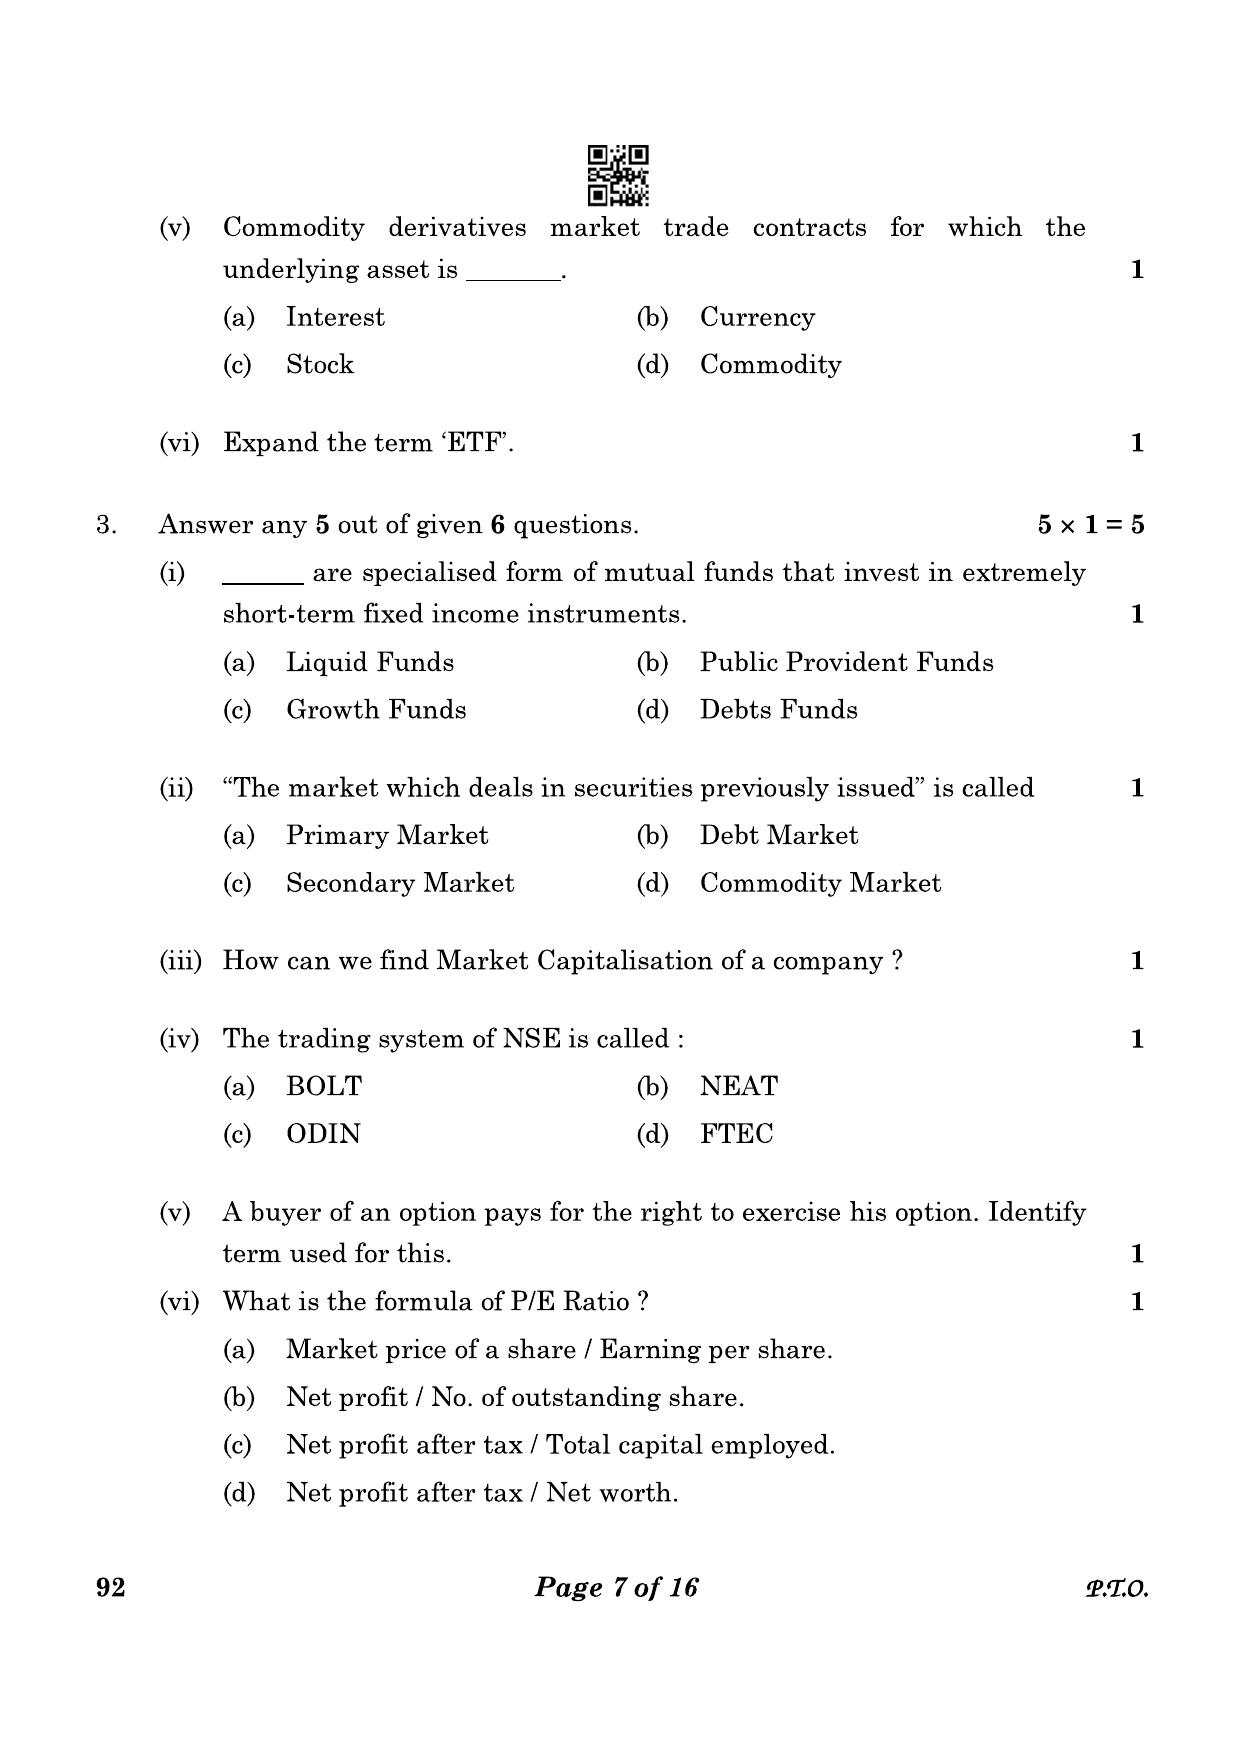 CBSE Class 10 92 Introduction To Financial Markets 2023 Question Paper - Page 7